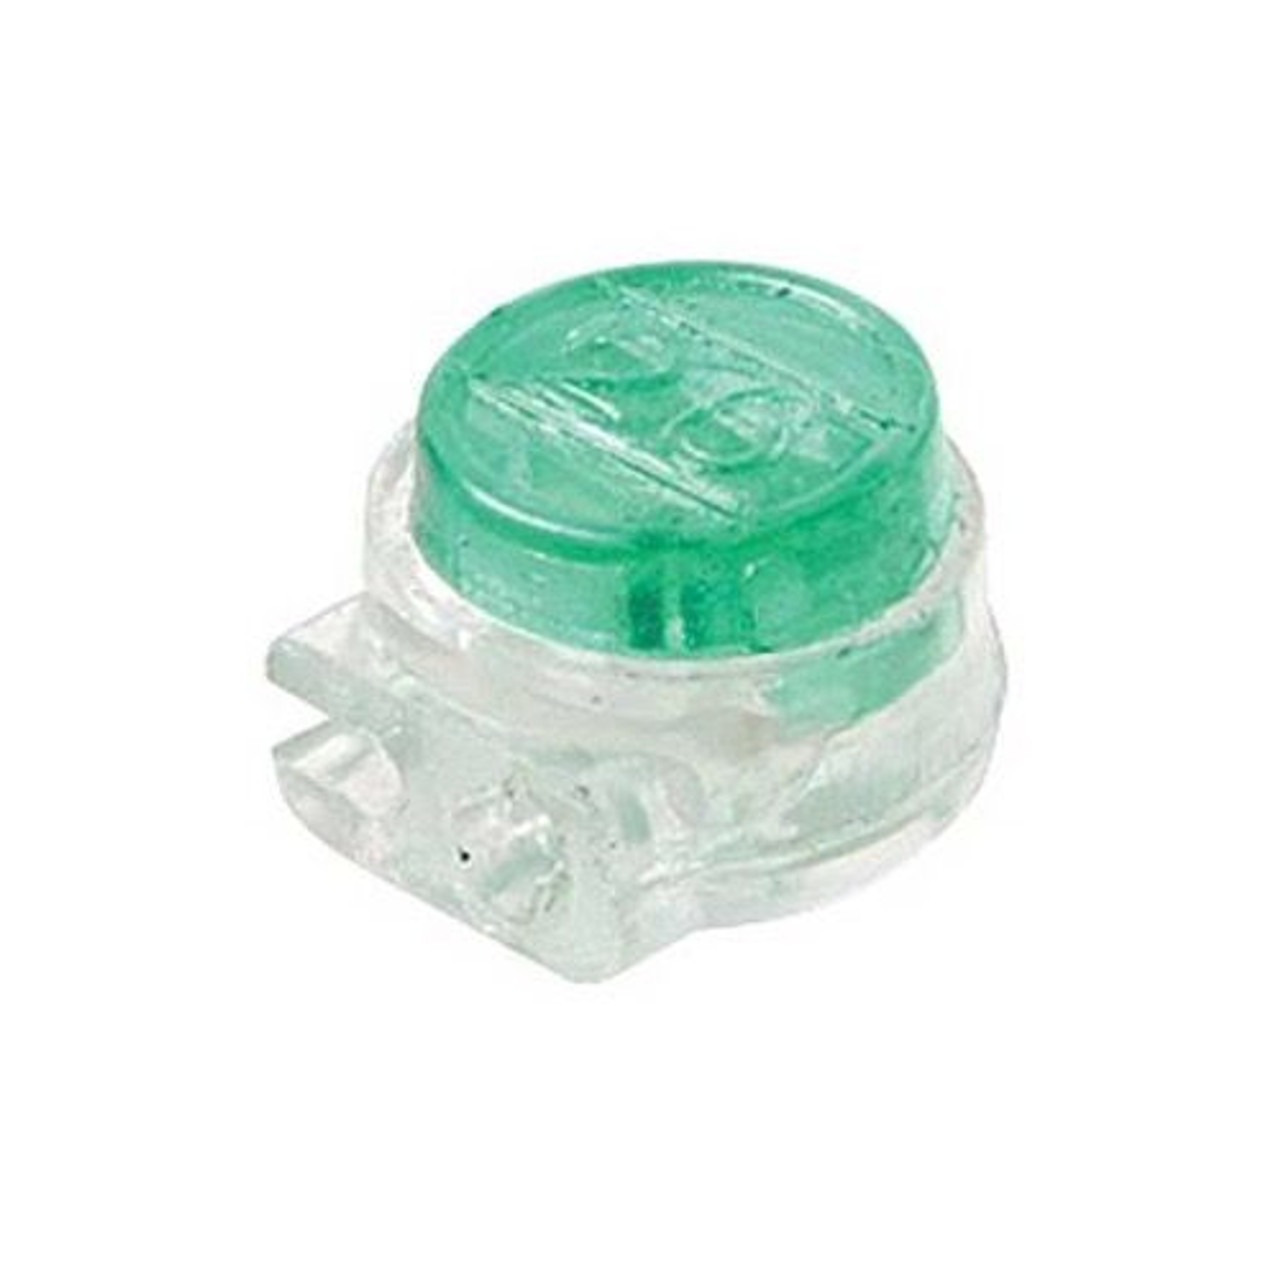 Steren 300-075 UG Connector IDC Green Butt Tap Telephone Connector Gel-Filled 19 - 26 AWG 3M Type 1 Pack Modular Telephone Wire Conductor Data Signal Cable Squeeze Crimp Audio Connectors